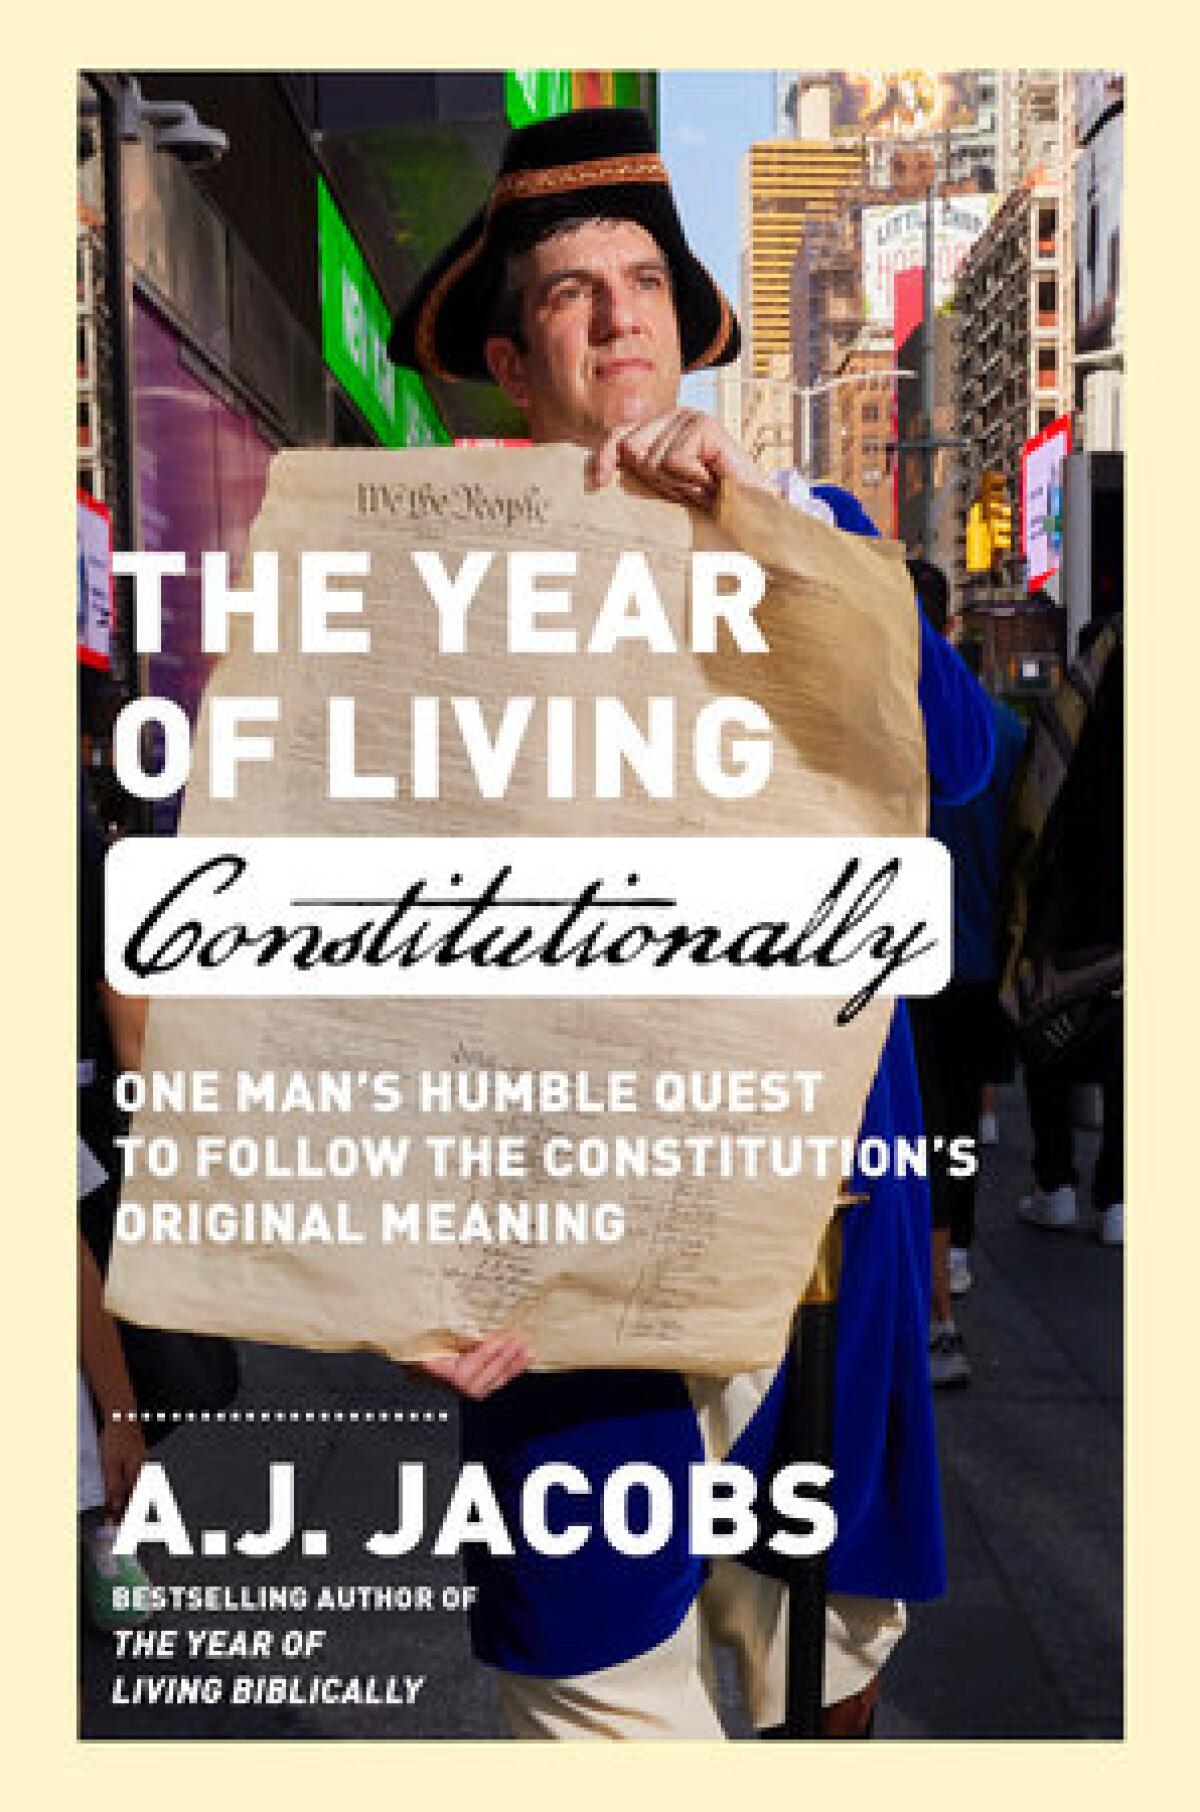 Cover of "The Year of Living Constitutionally"